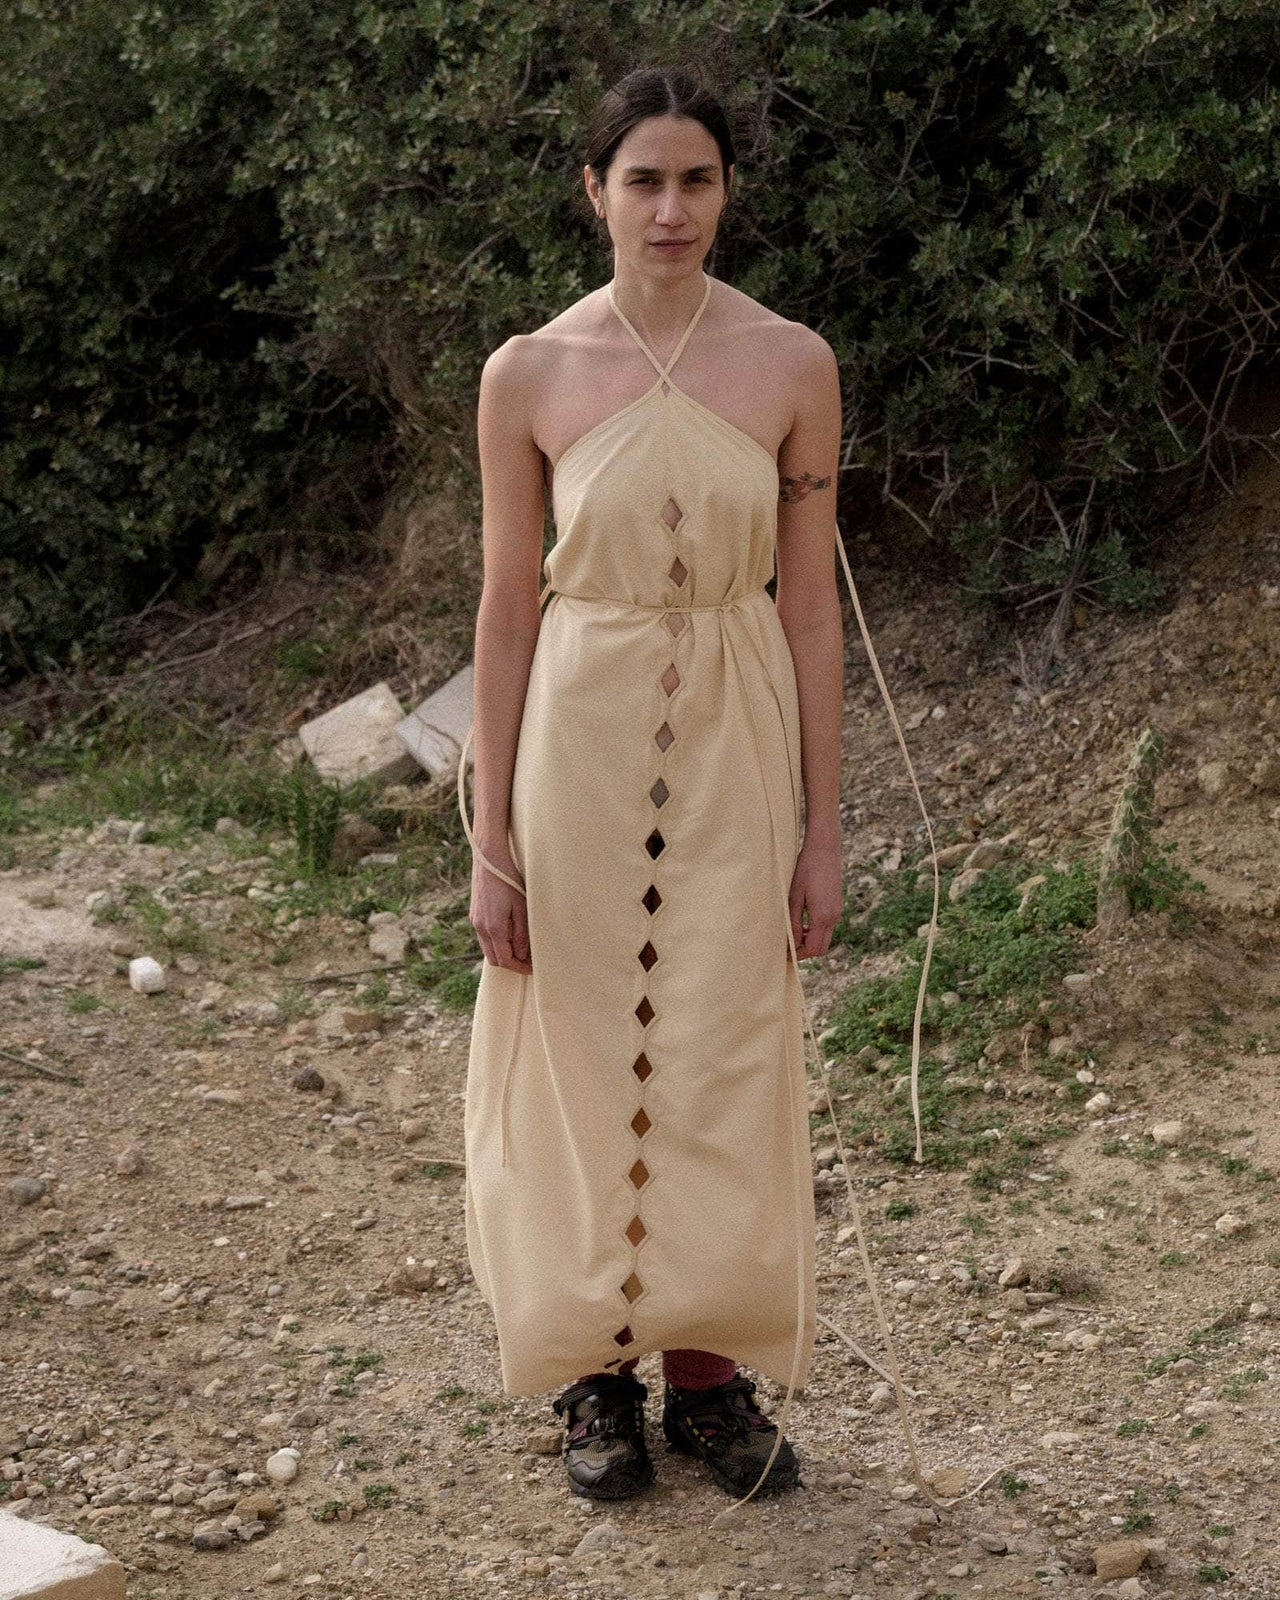 Dresses | Basics in Natural and Recycled Fibers | バセランジュ